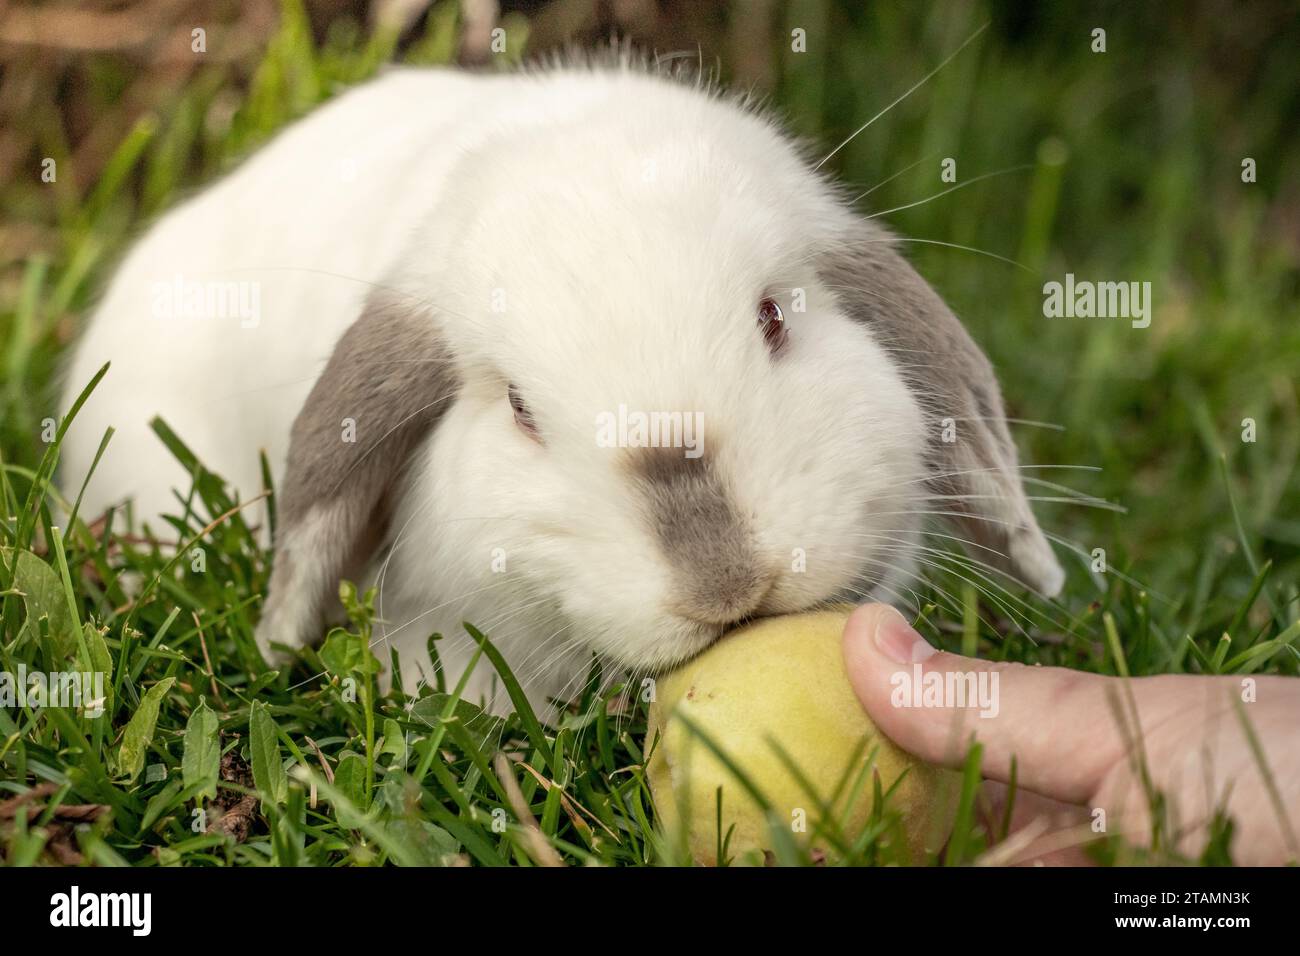 White Holland Lop Rabbit Bunny Albino Californian Siamese Red Eyes Flop Ear Close Up Eating Peach Nibbling Stock Photo